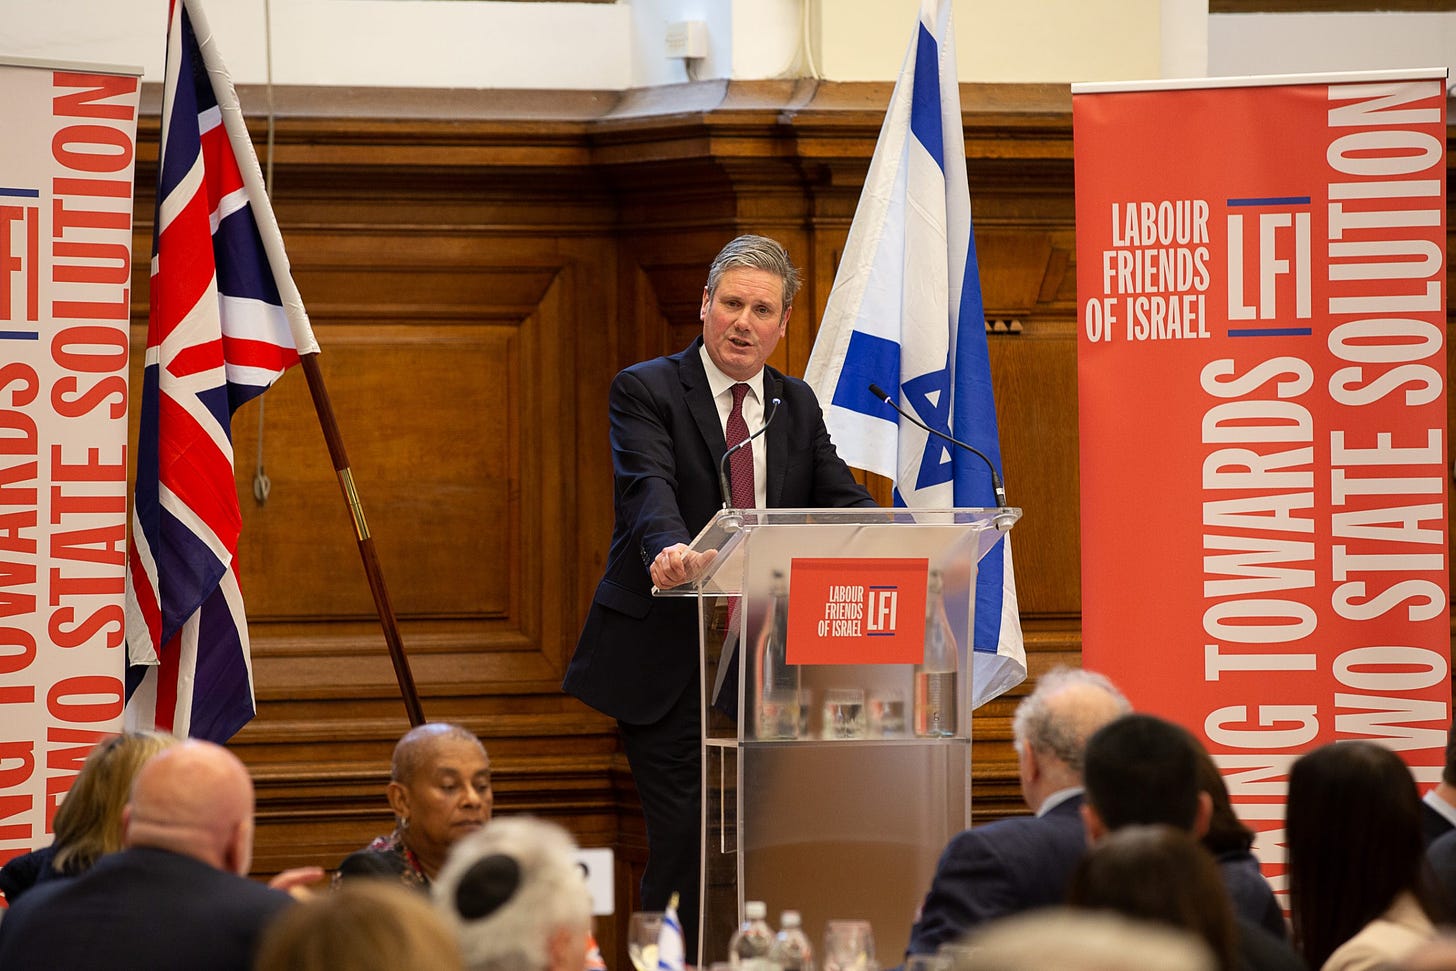 Keir Starmer's Speech to LFI's Annual Lunch 2021 - Labour Friends of Israel  Labour Friends of Israel